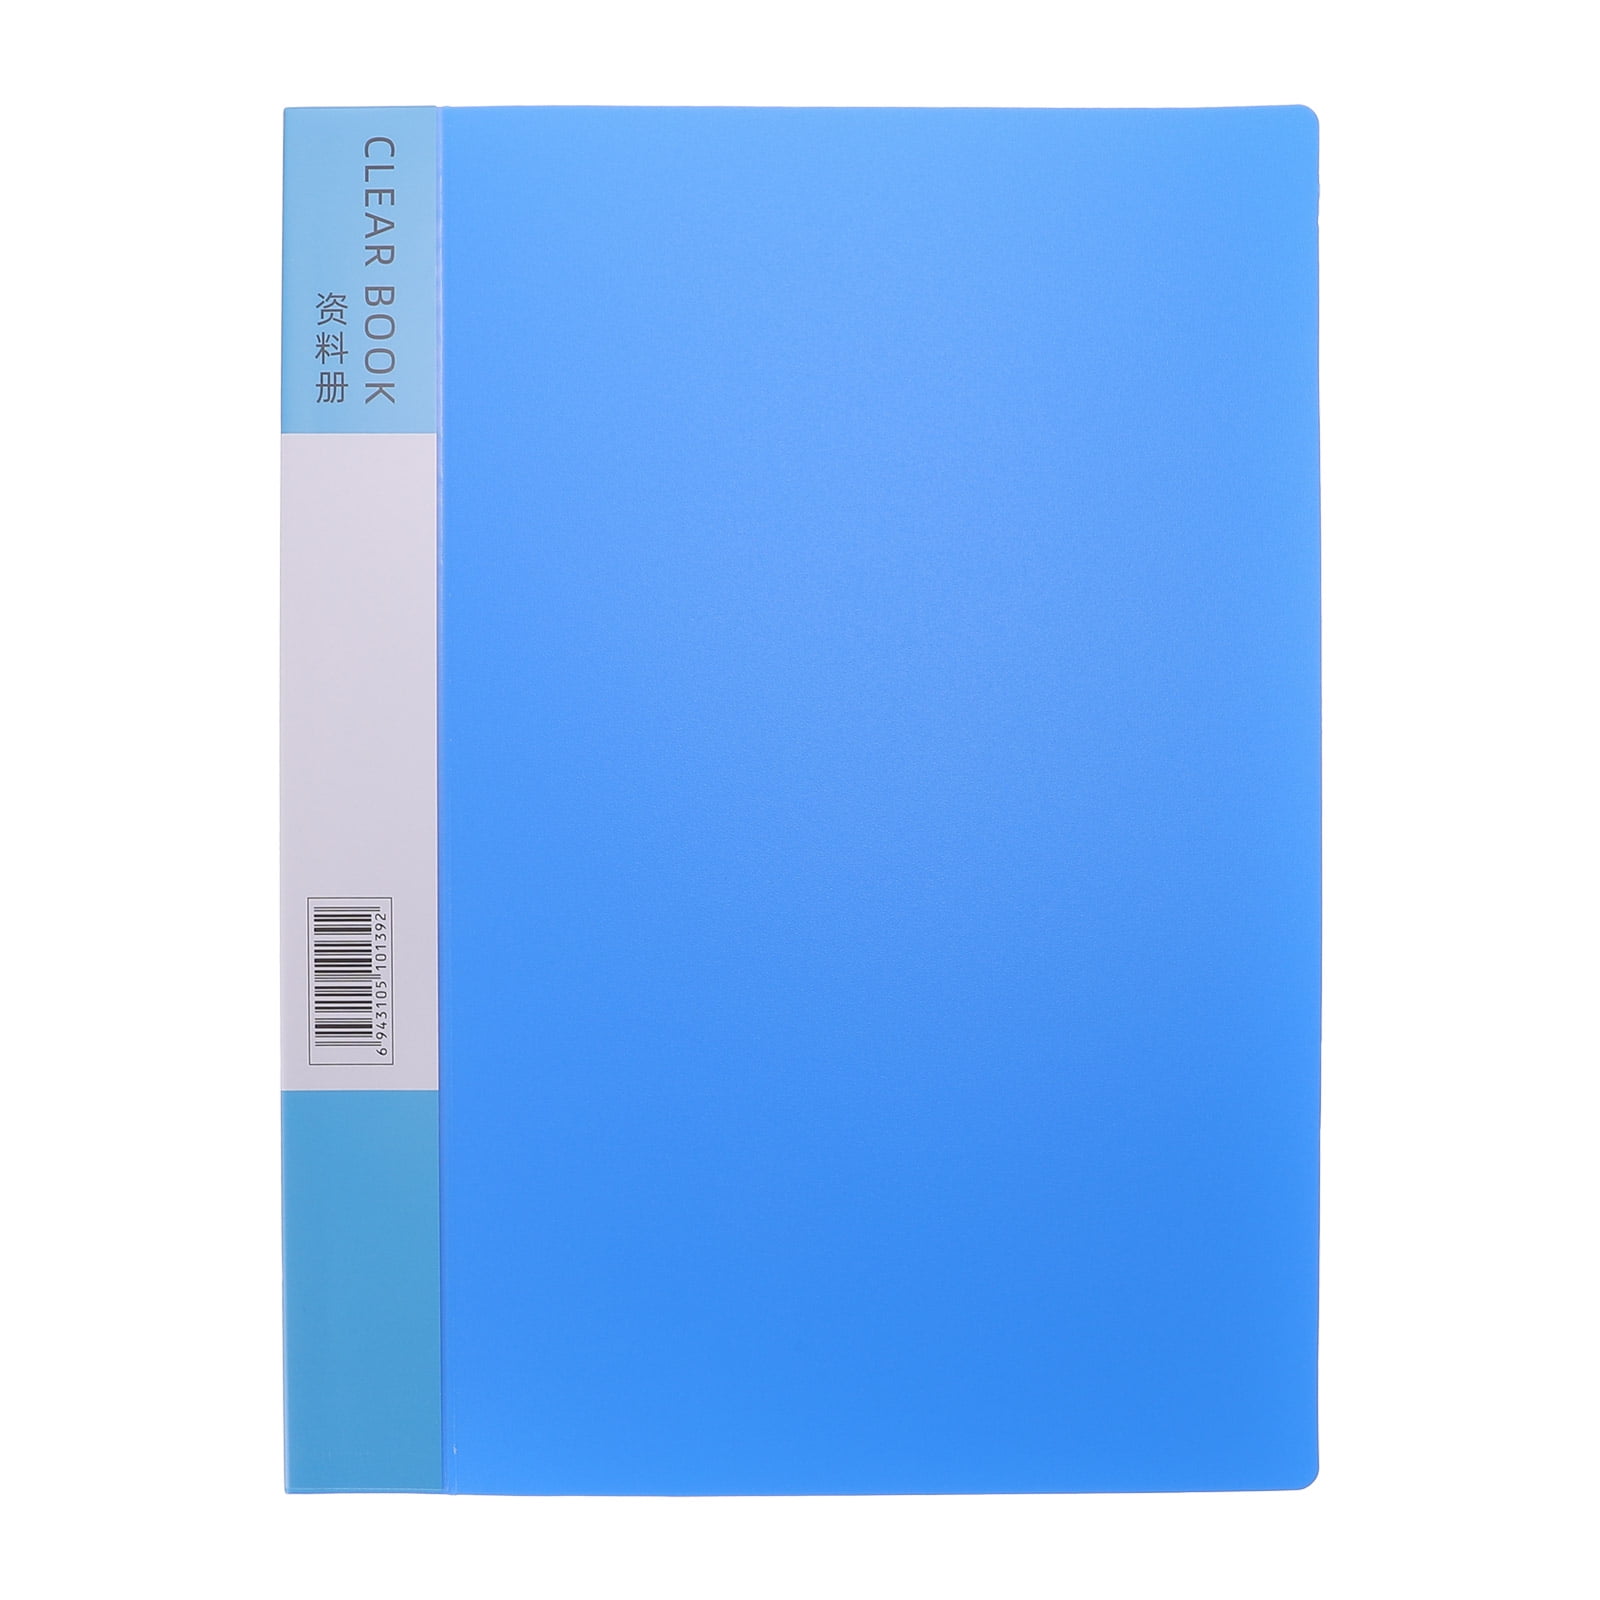 2pcs A3 Plastic Sleeves Clear Pockets Photo Album 30 Pages